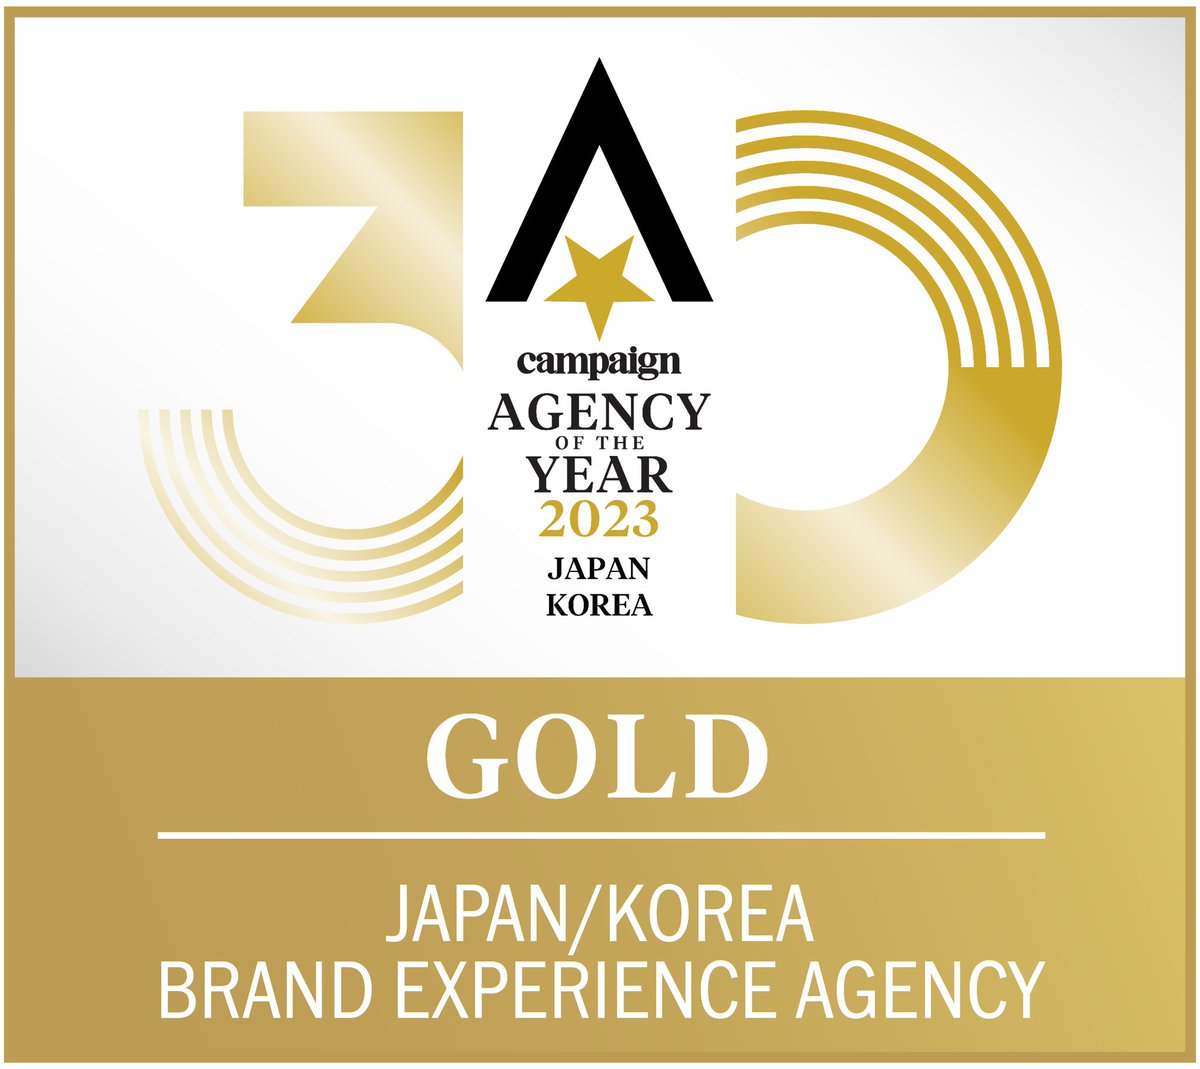 Proud to bring five awards home at the Campaign Agency of the Year Awards 2023! Japan/Korea Brand Experience Agency of the Year GOLD four years in a row, Event Mktg AOY GOLD, Content Mktg AOY SILVER, Creative AOY SILVER, and Digital AOY BRONZE #AOY30 #CampaignAOY